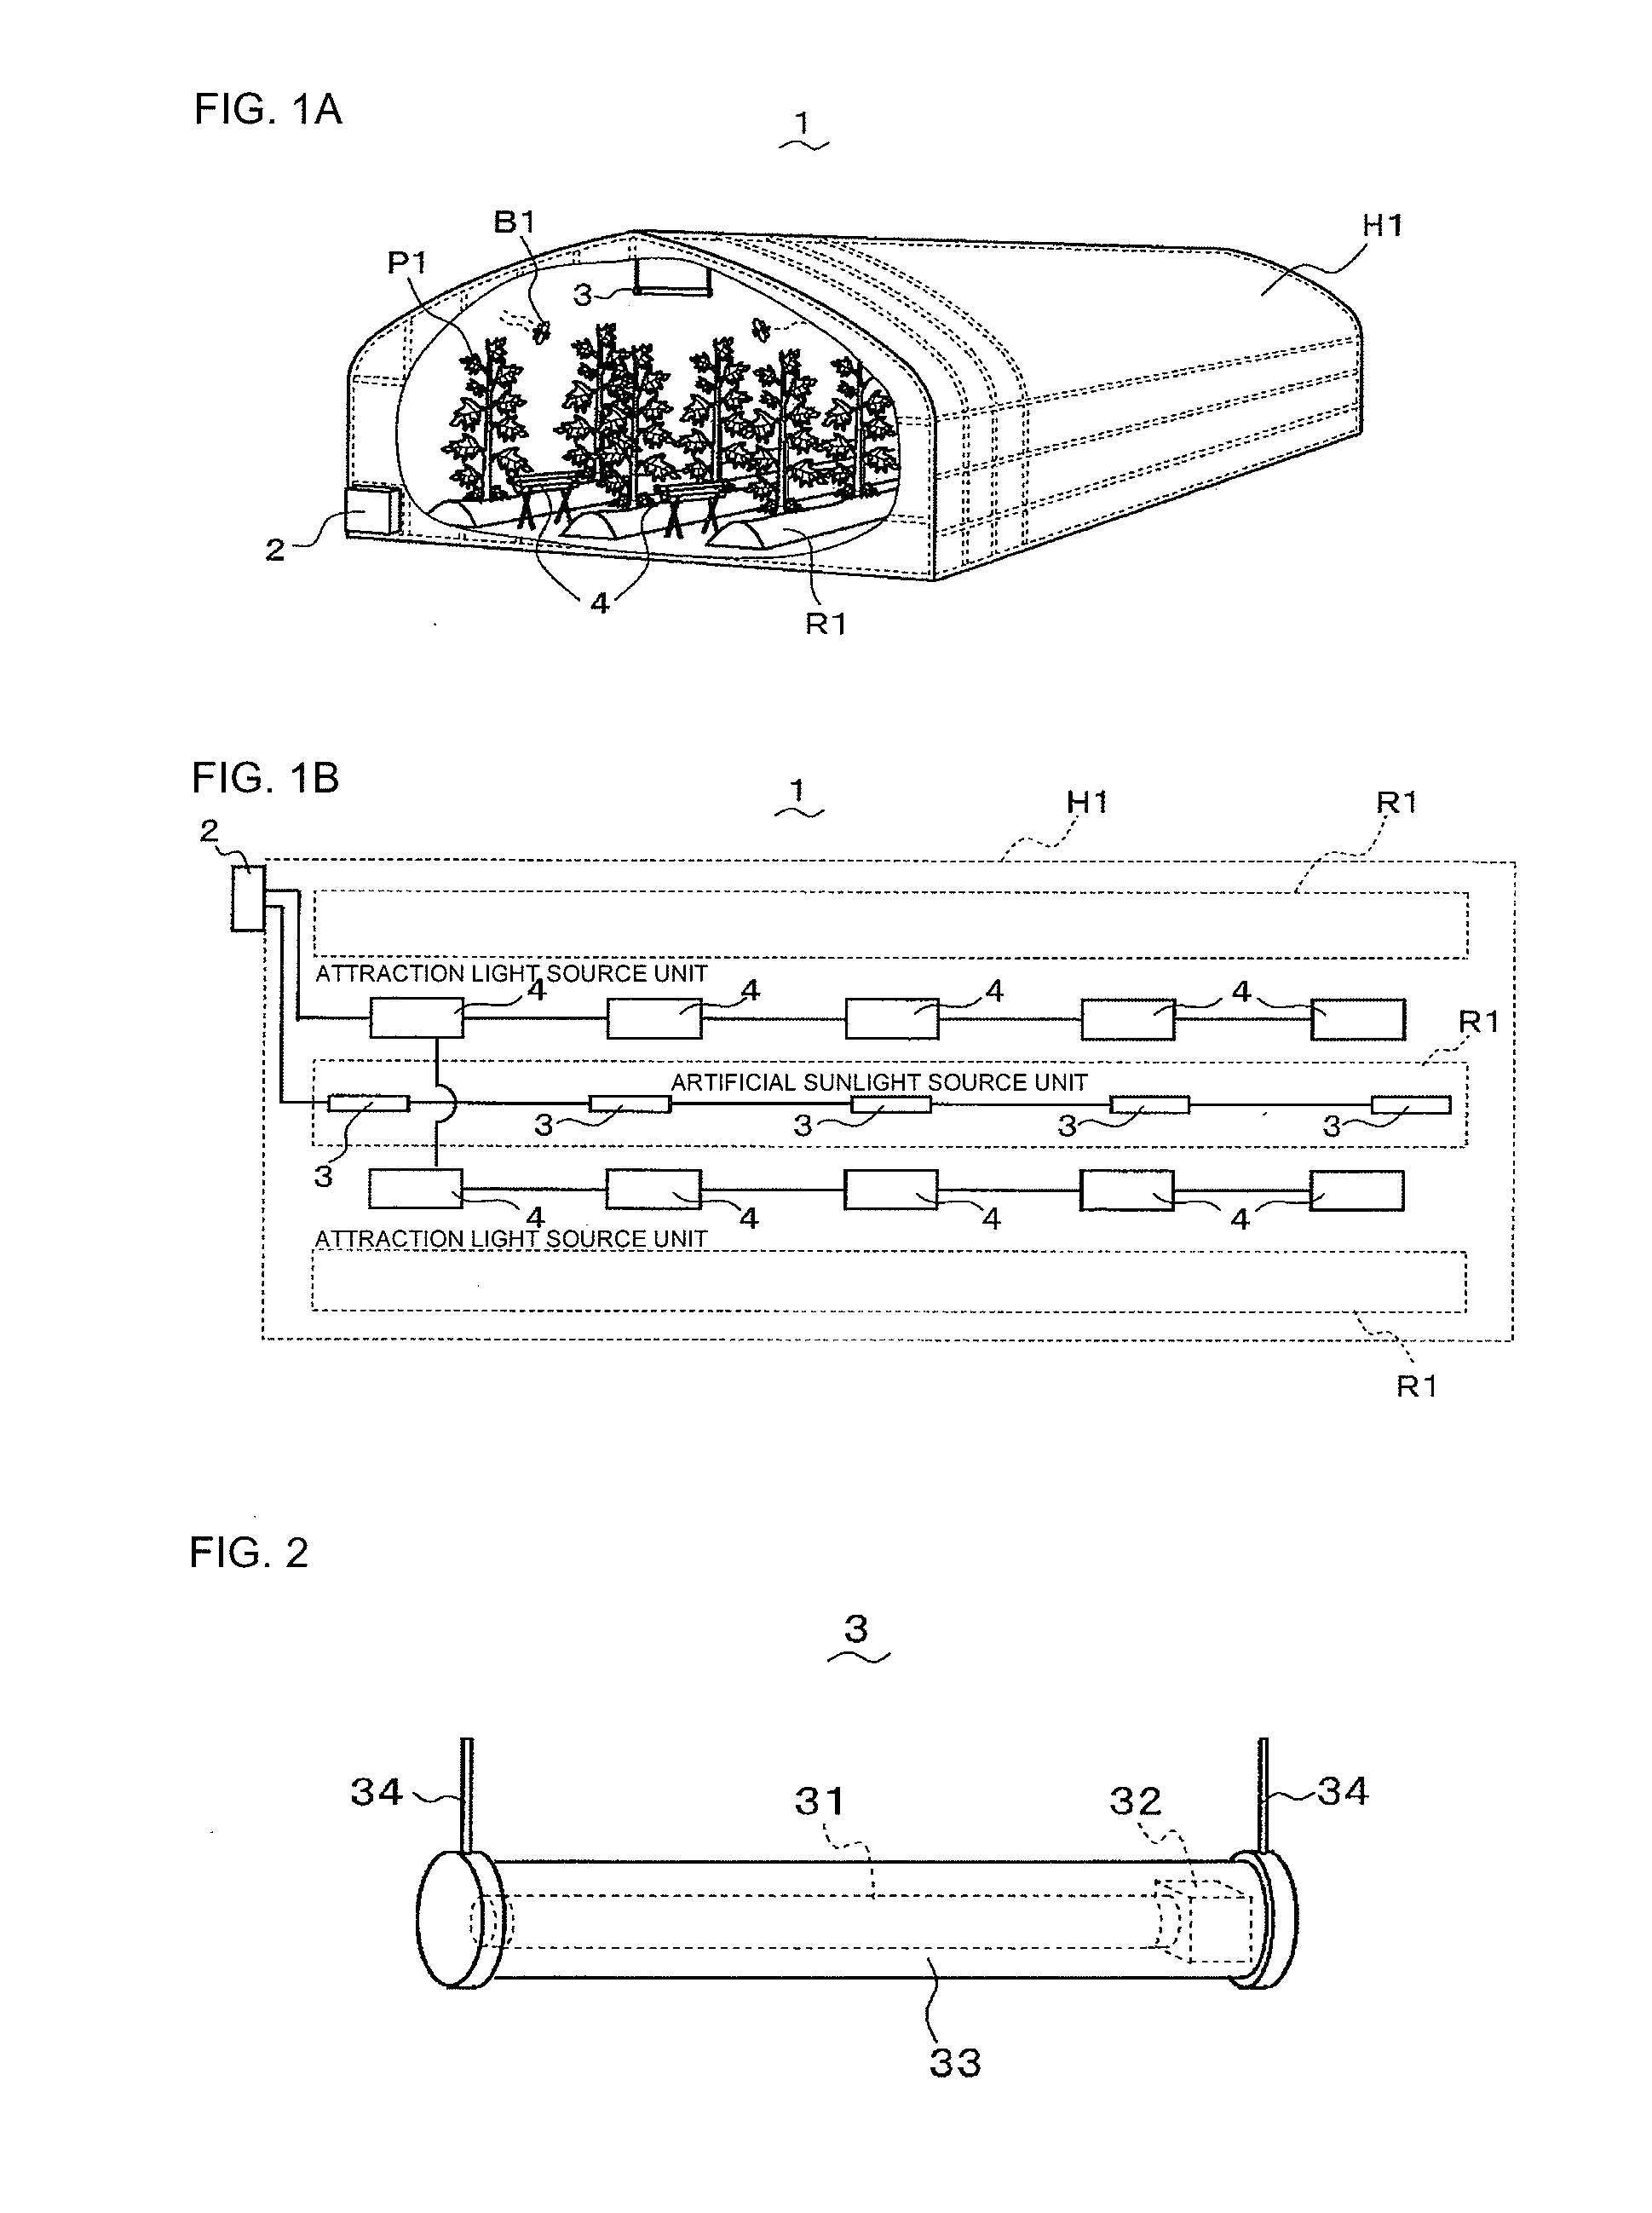 Insect attractant lighting method and insect attractant lighting system